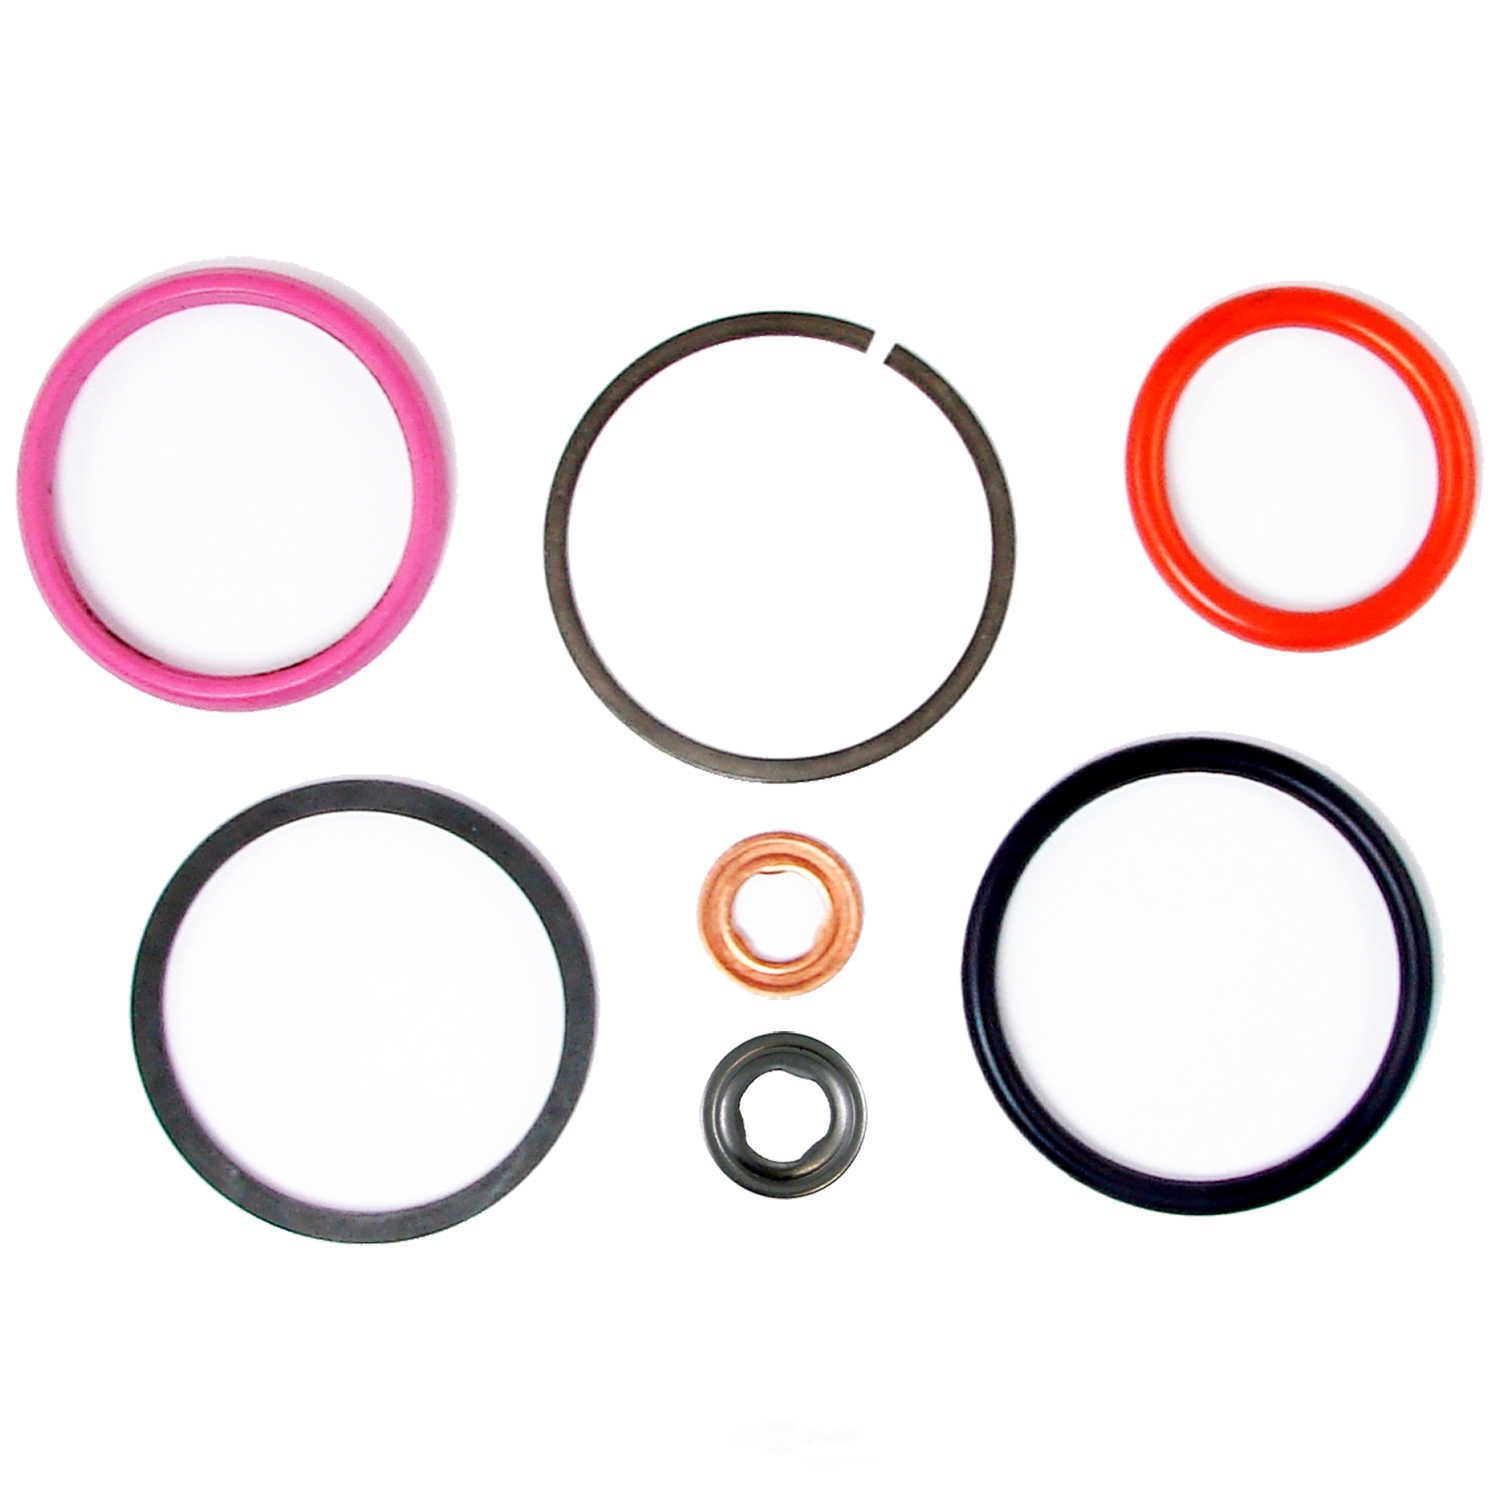 GB REMANUFACTURING INC. - Fuel Injector Seal Kit - GBR 522-044